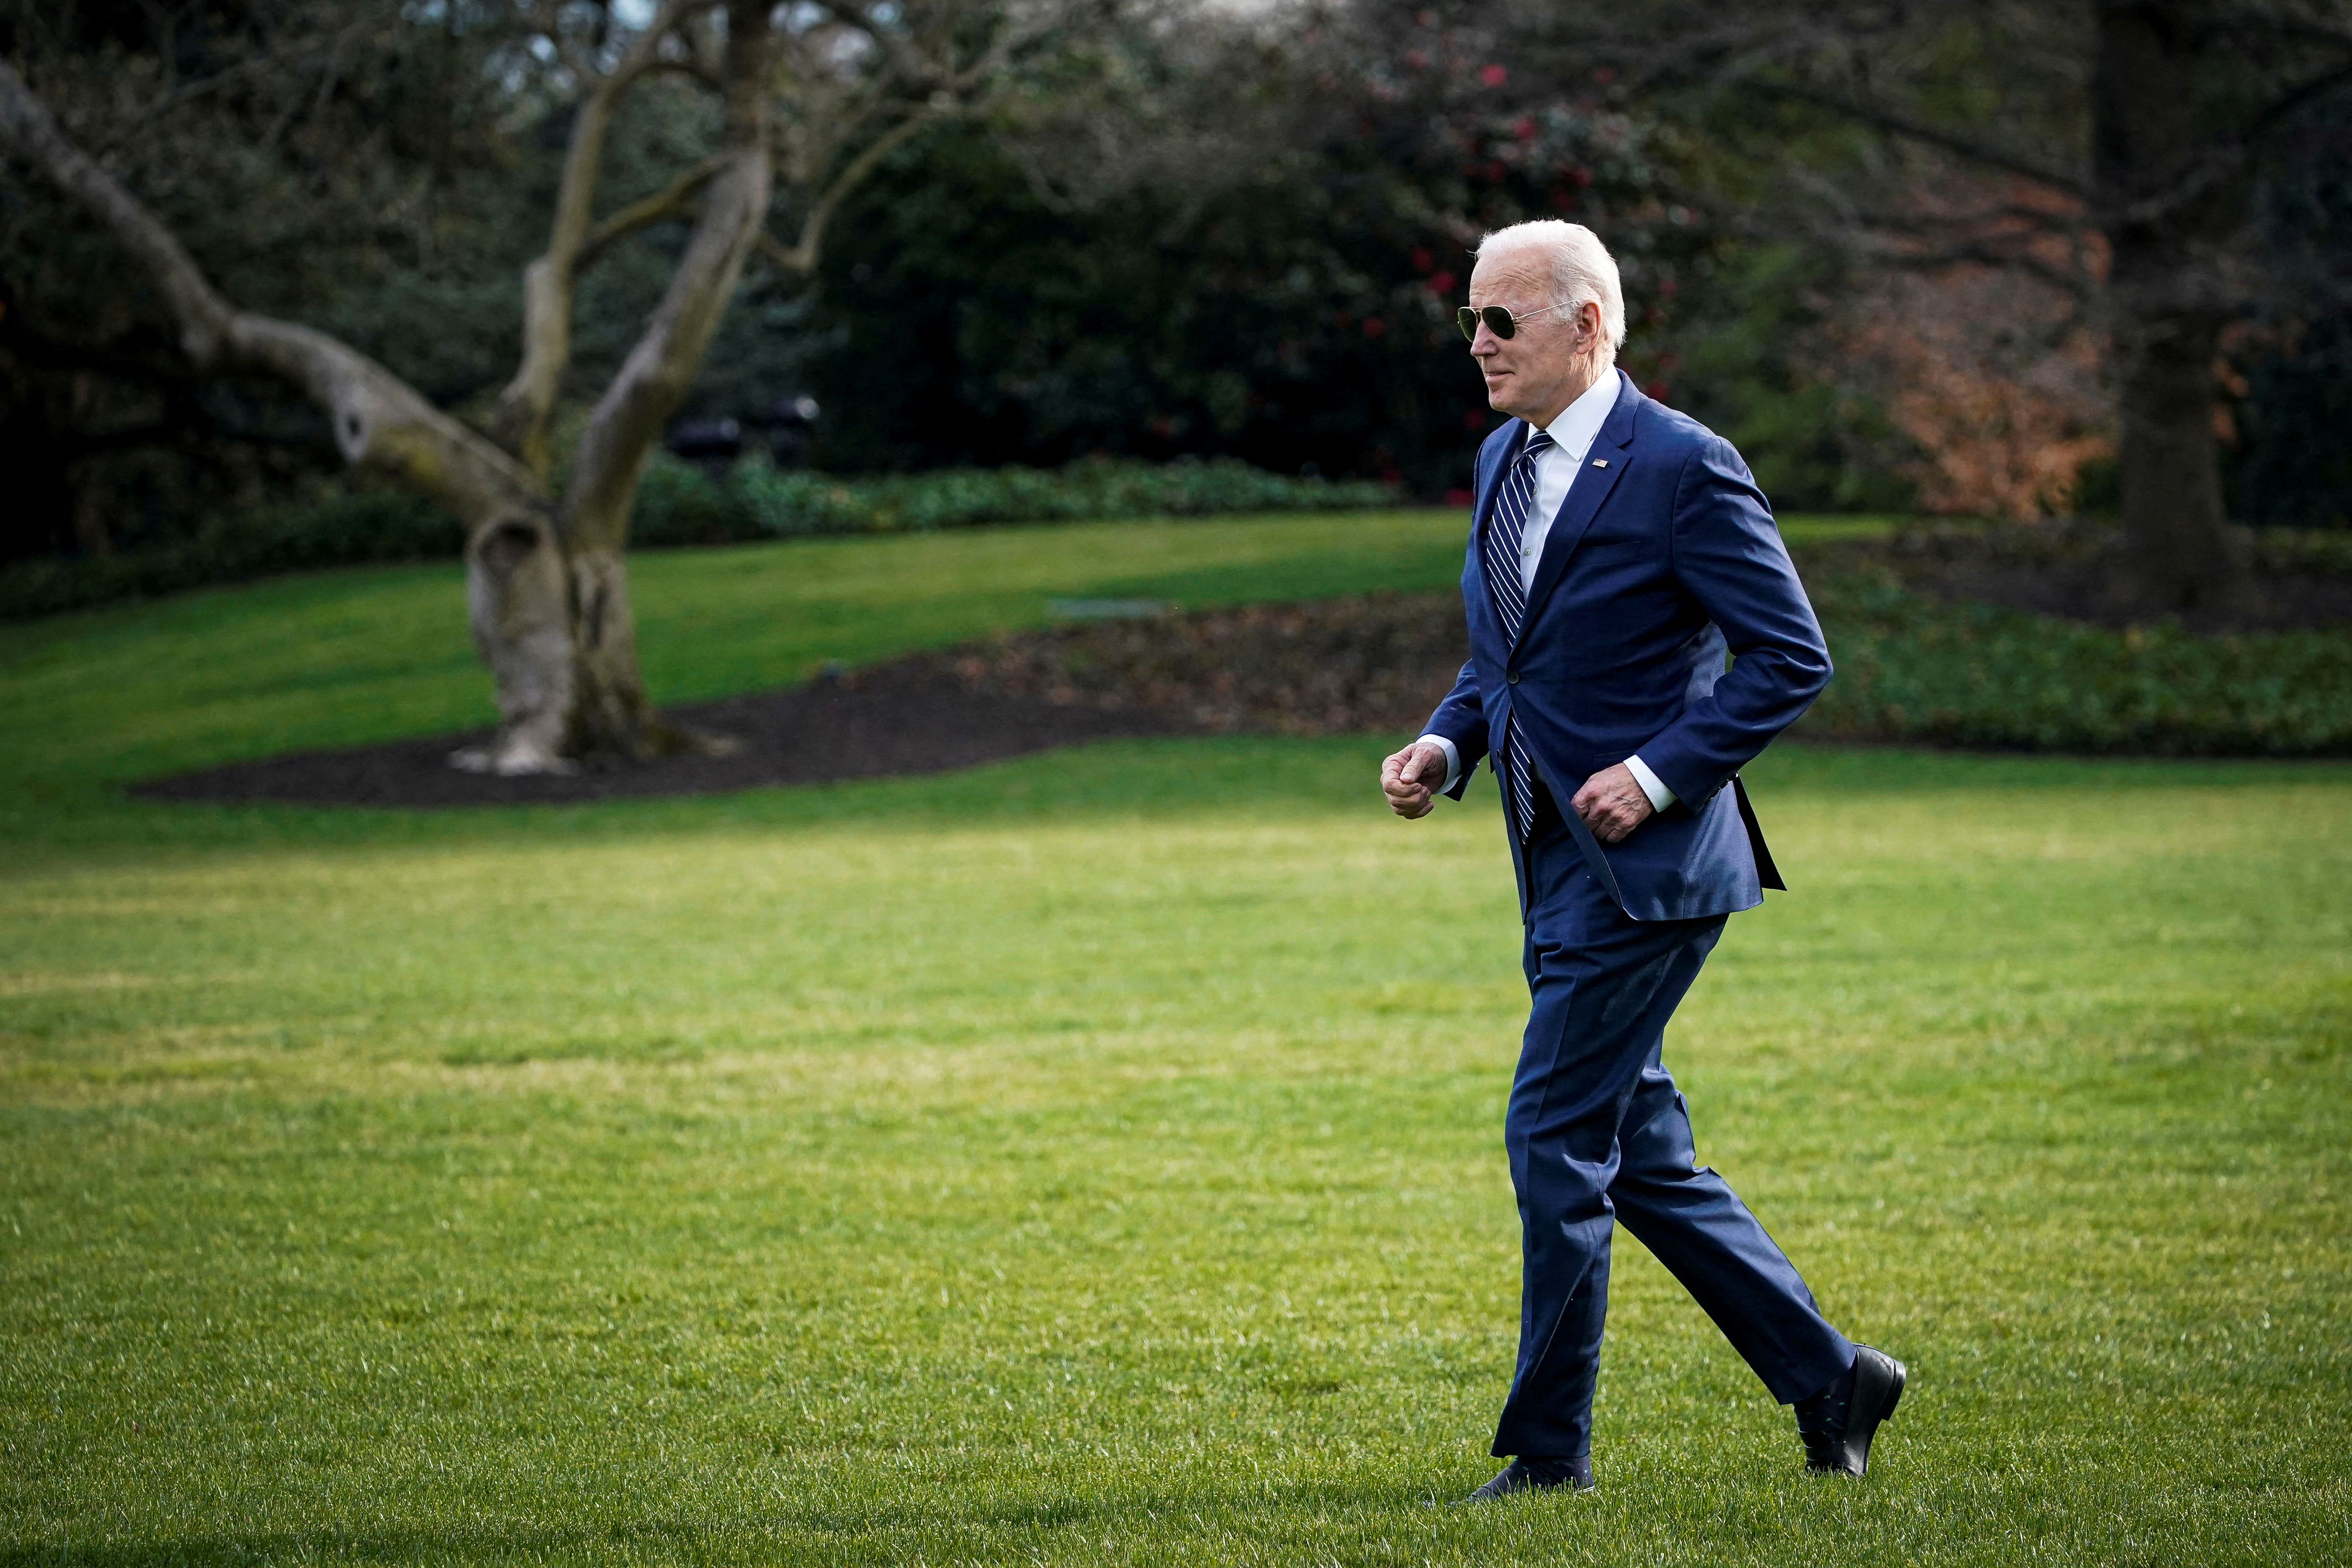 Reuters/Ipsos Poll: President Biden Approval Rating Drops to New Low of 40%